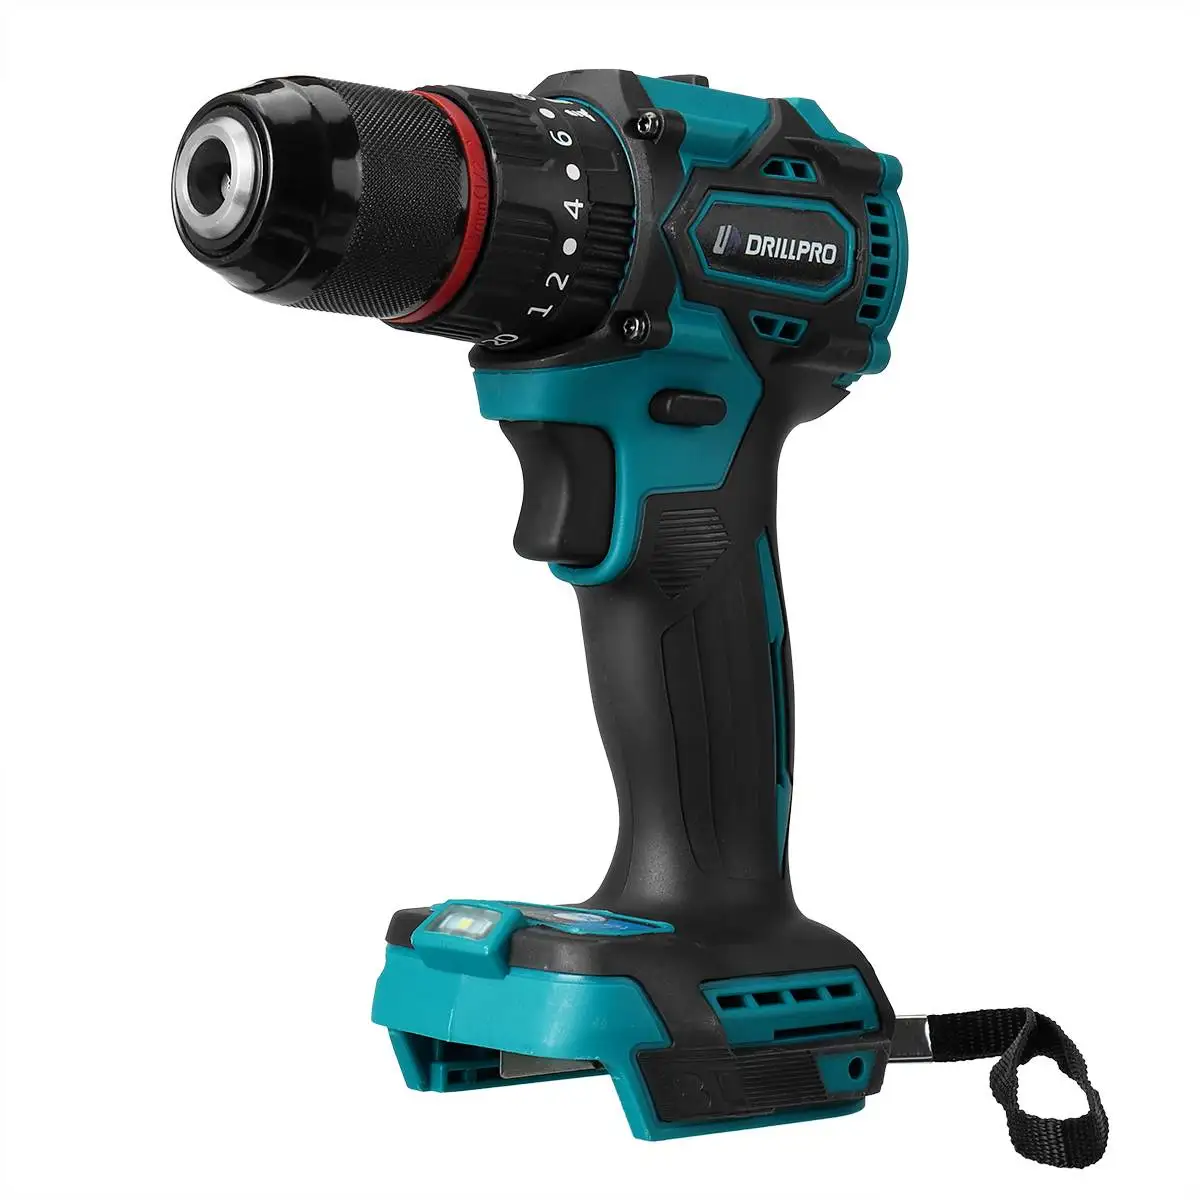 

Drillpro Brushless Electric Impact Drill 23-48Nm Torque Electric Screwdriver for DIY Projects Power Tool Cordless Drill